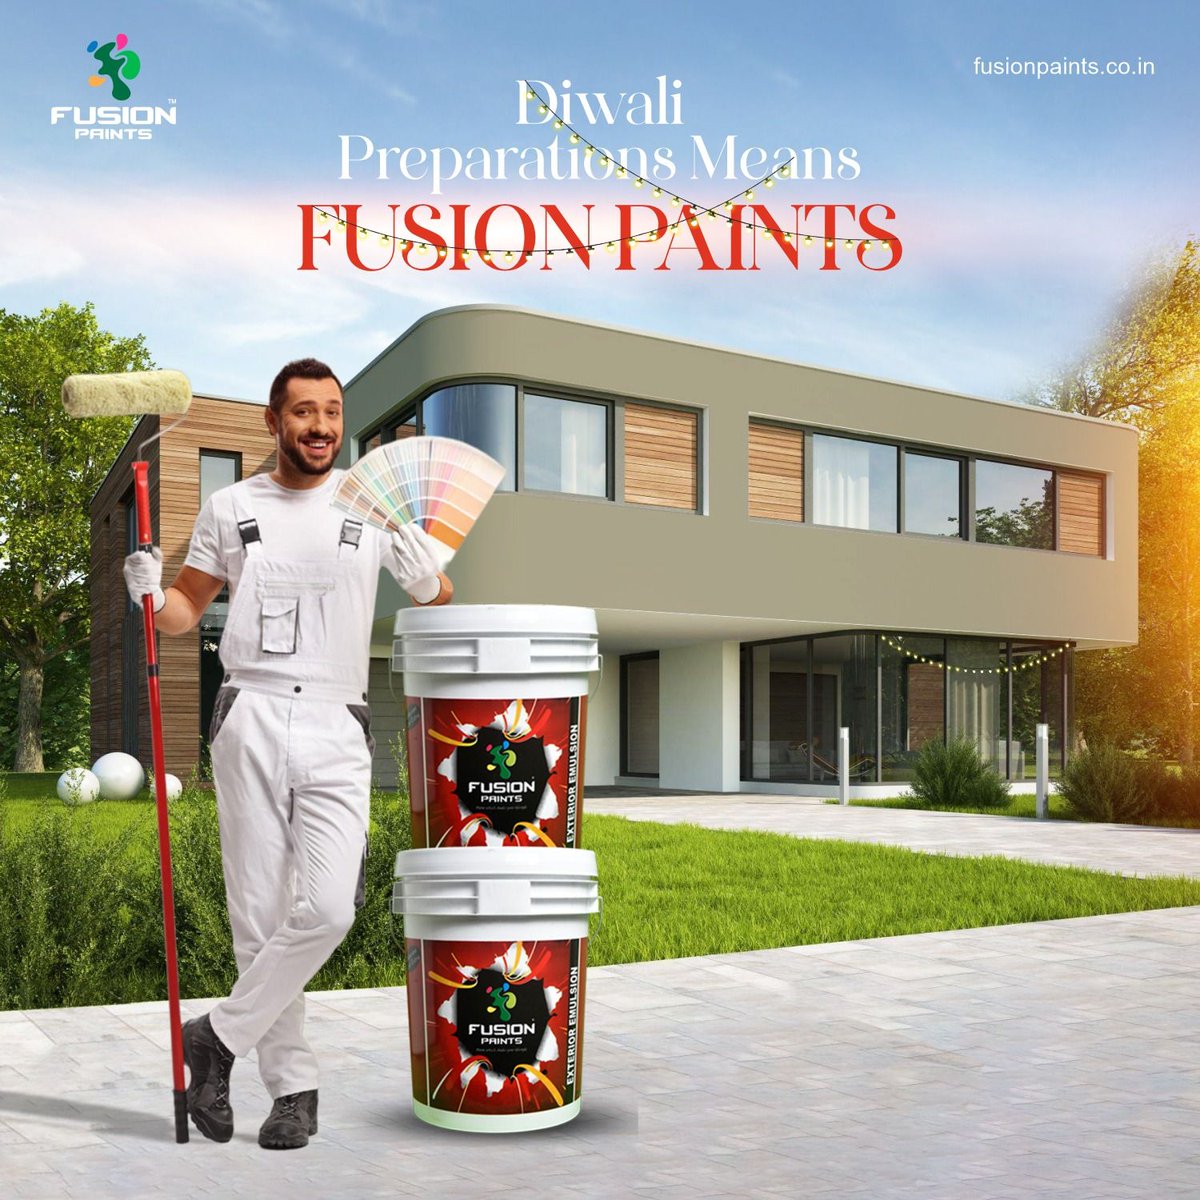 With vibrant colours and Intricate designs, it's time for Diwali preparations. Try Fusion Paints and make your house look beautiful.

#fusionpaints #wallpaints #housepaints #painting #colours #newshades #diwalipreparation #diwalipainting #diwalidecoration